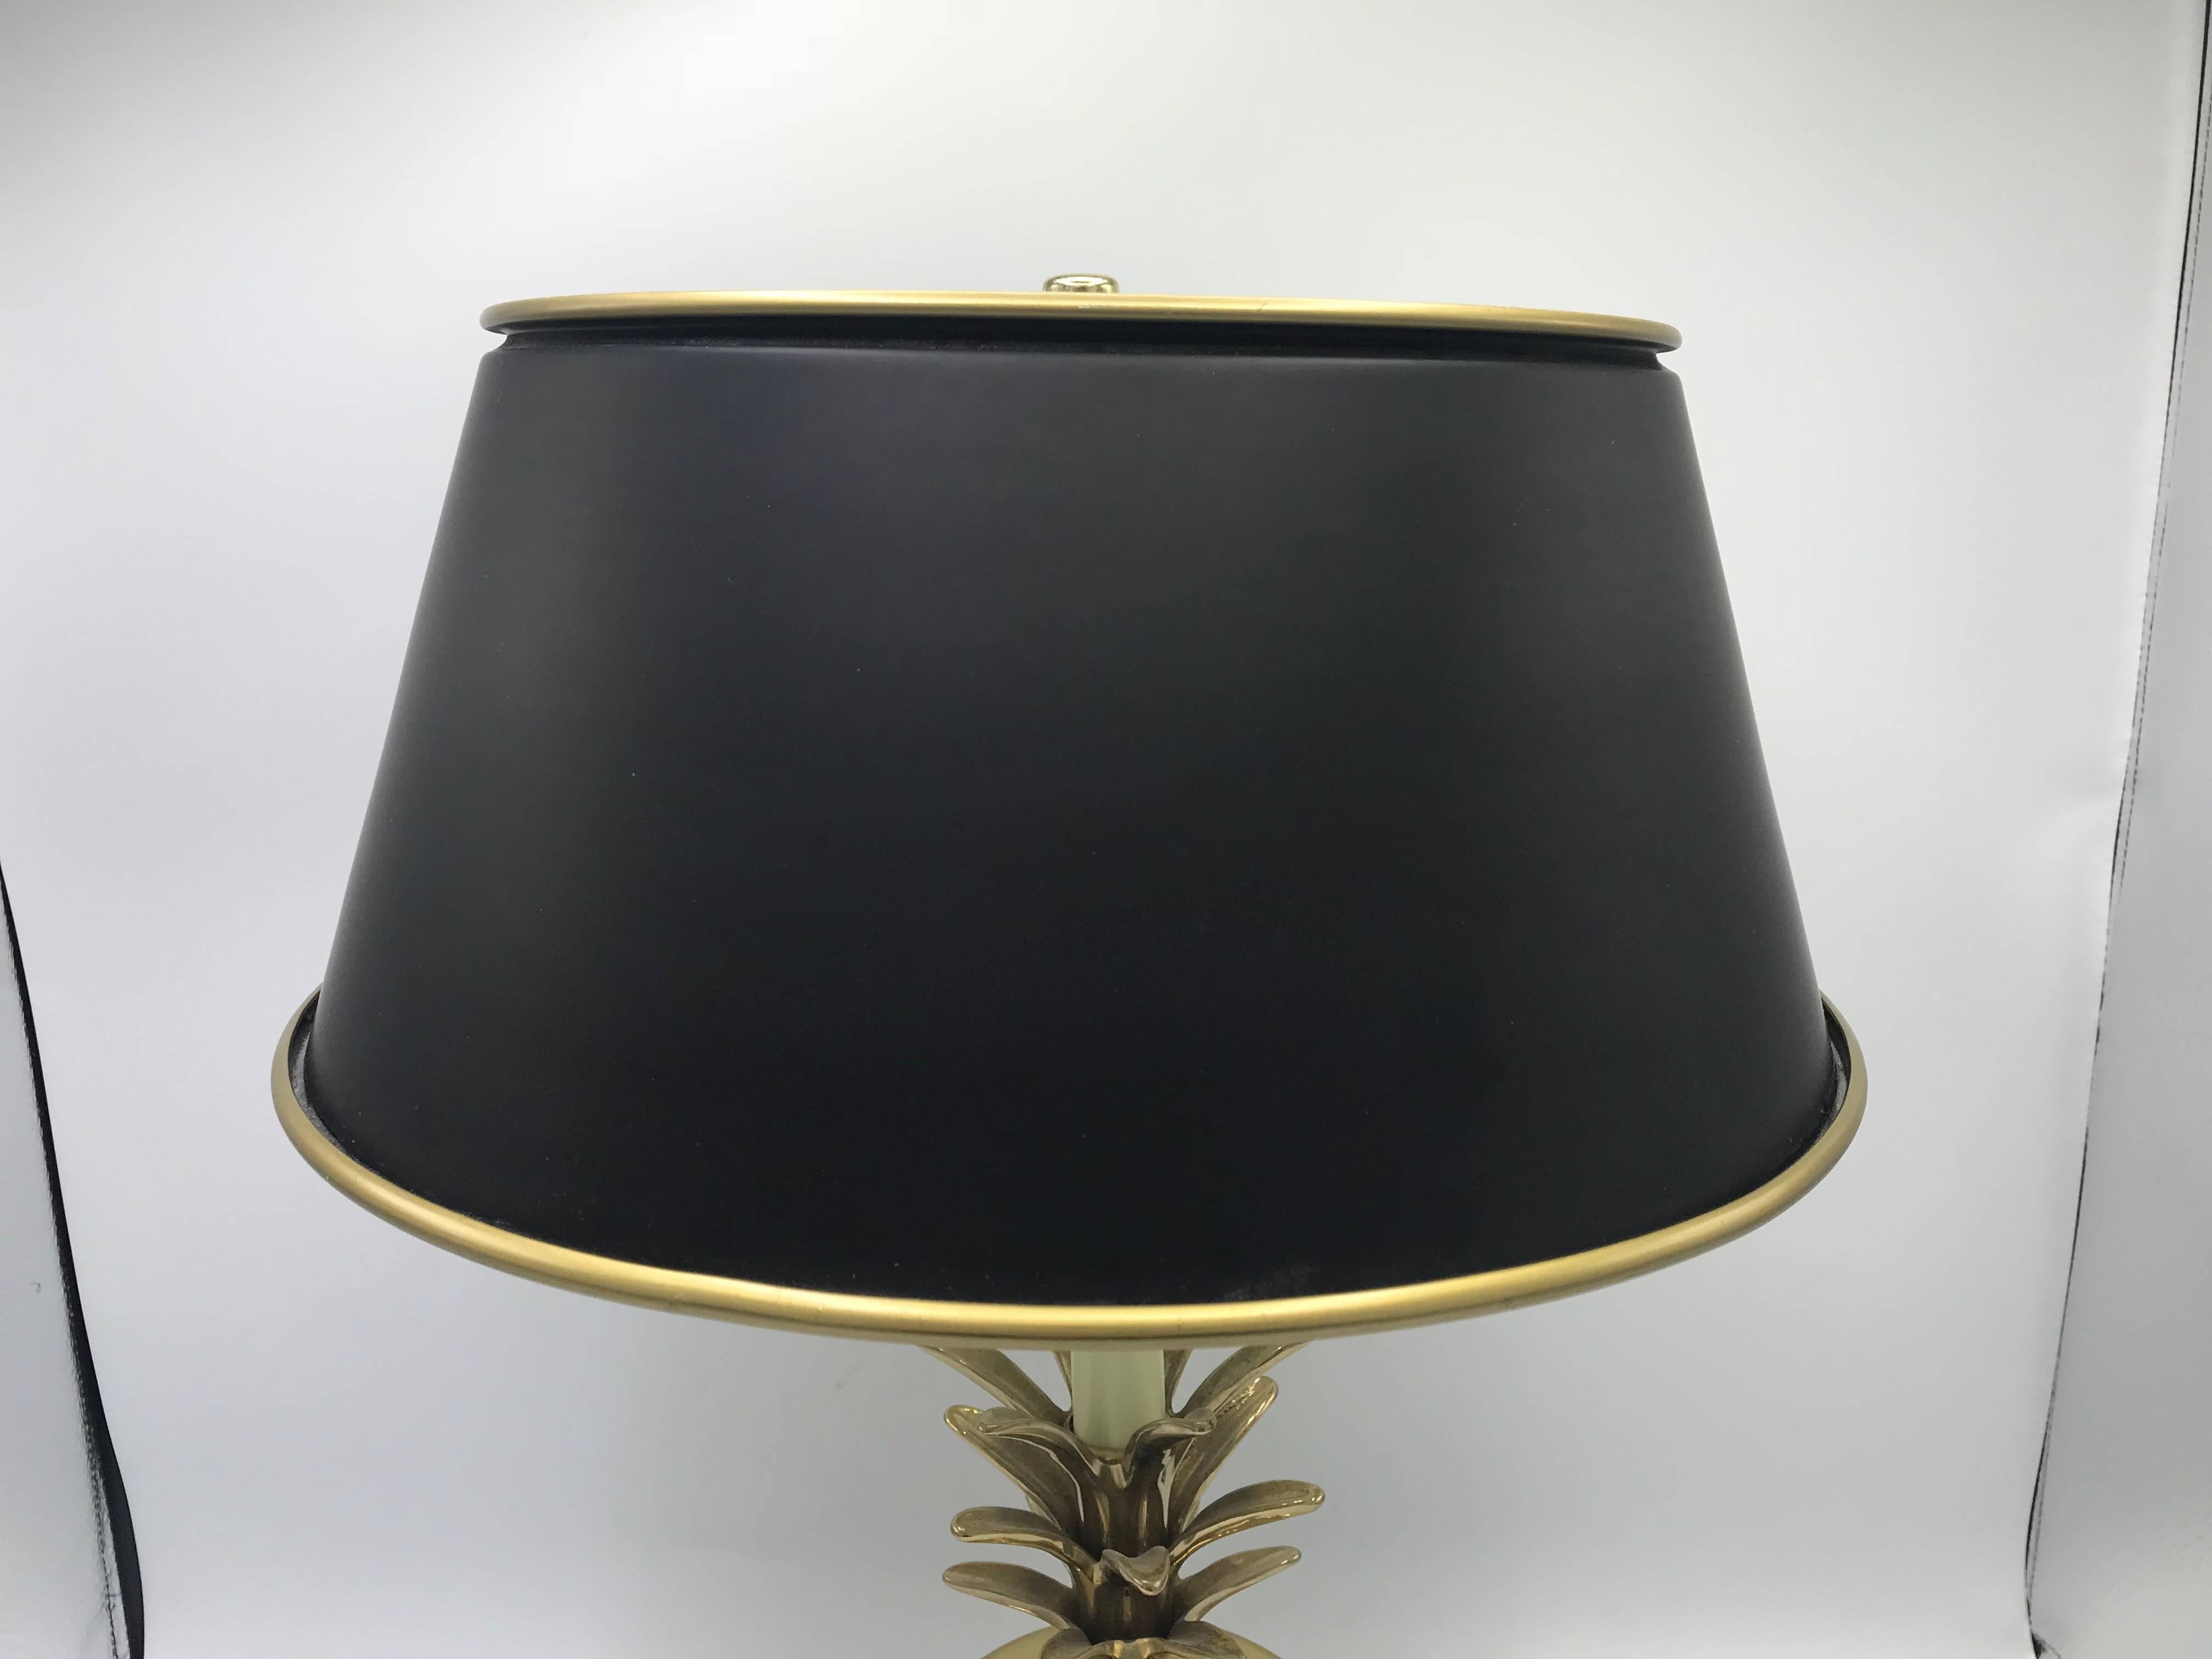 20th Century 1970s Brass Pineapple Lamp with Black Tole Shade